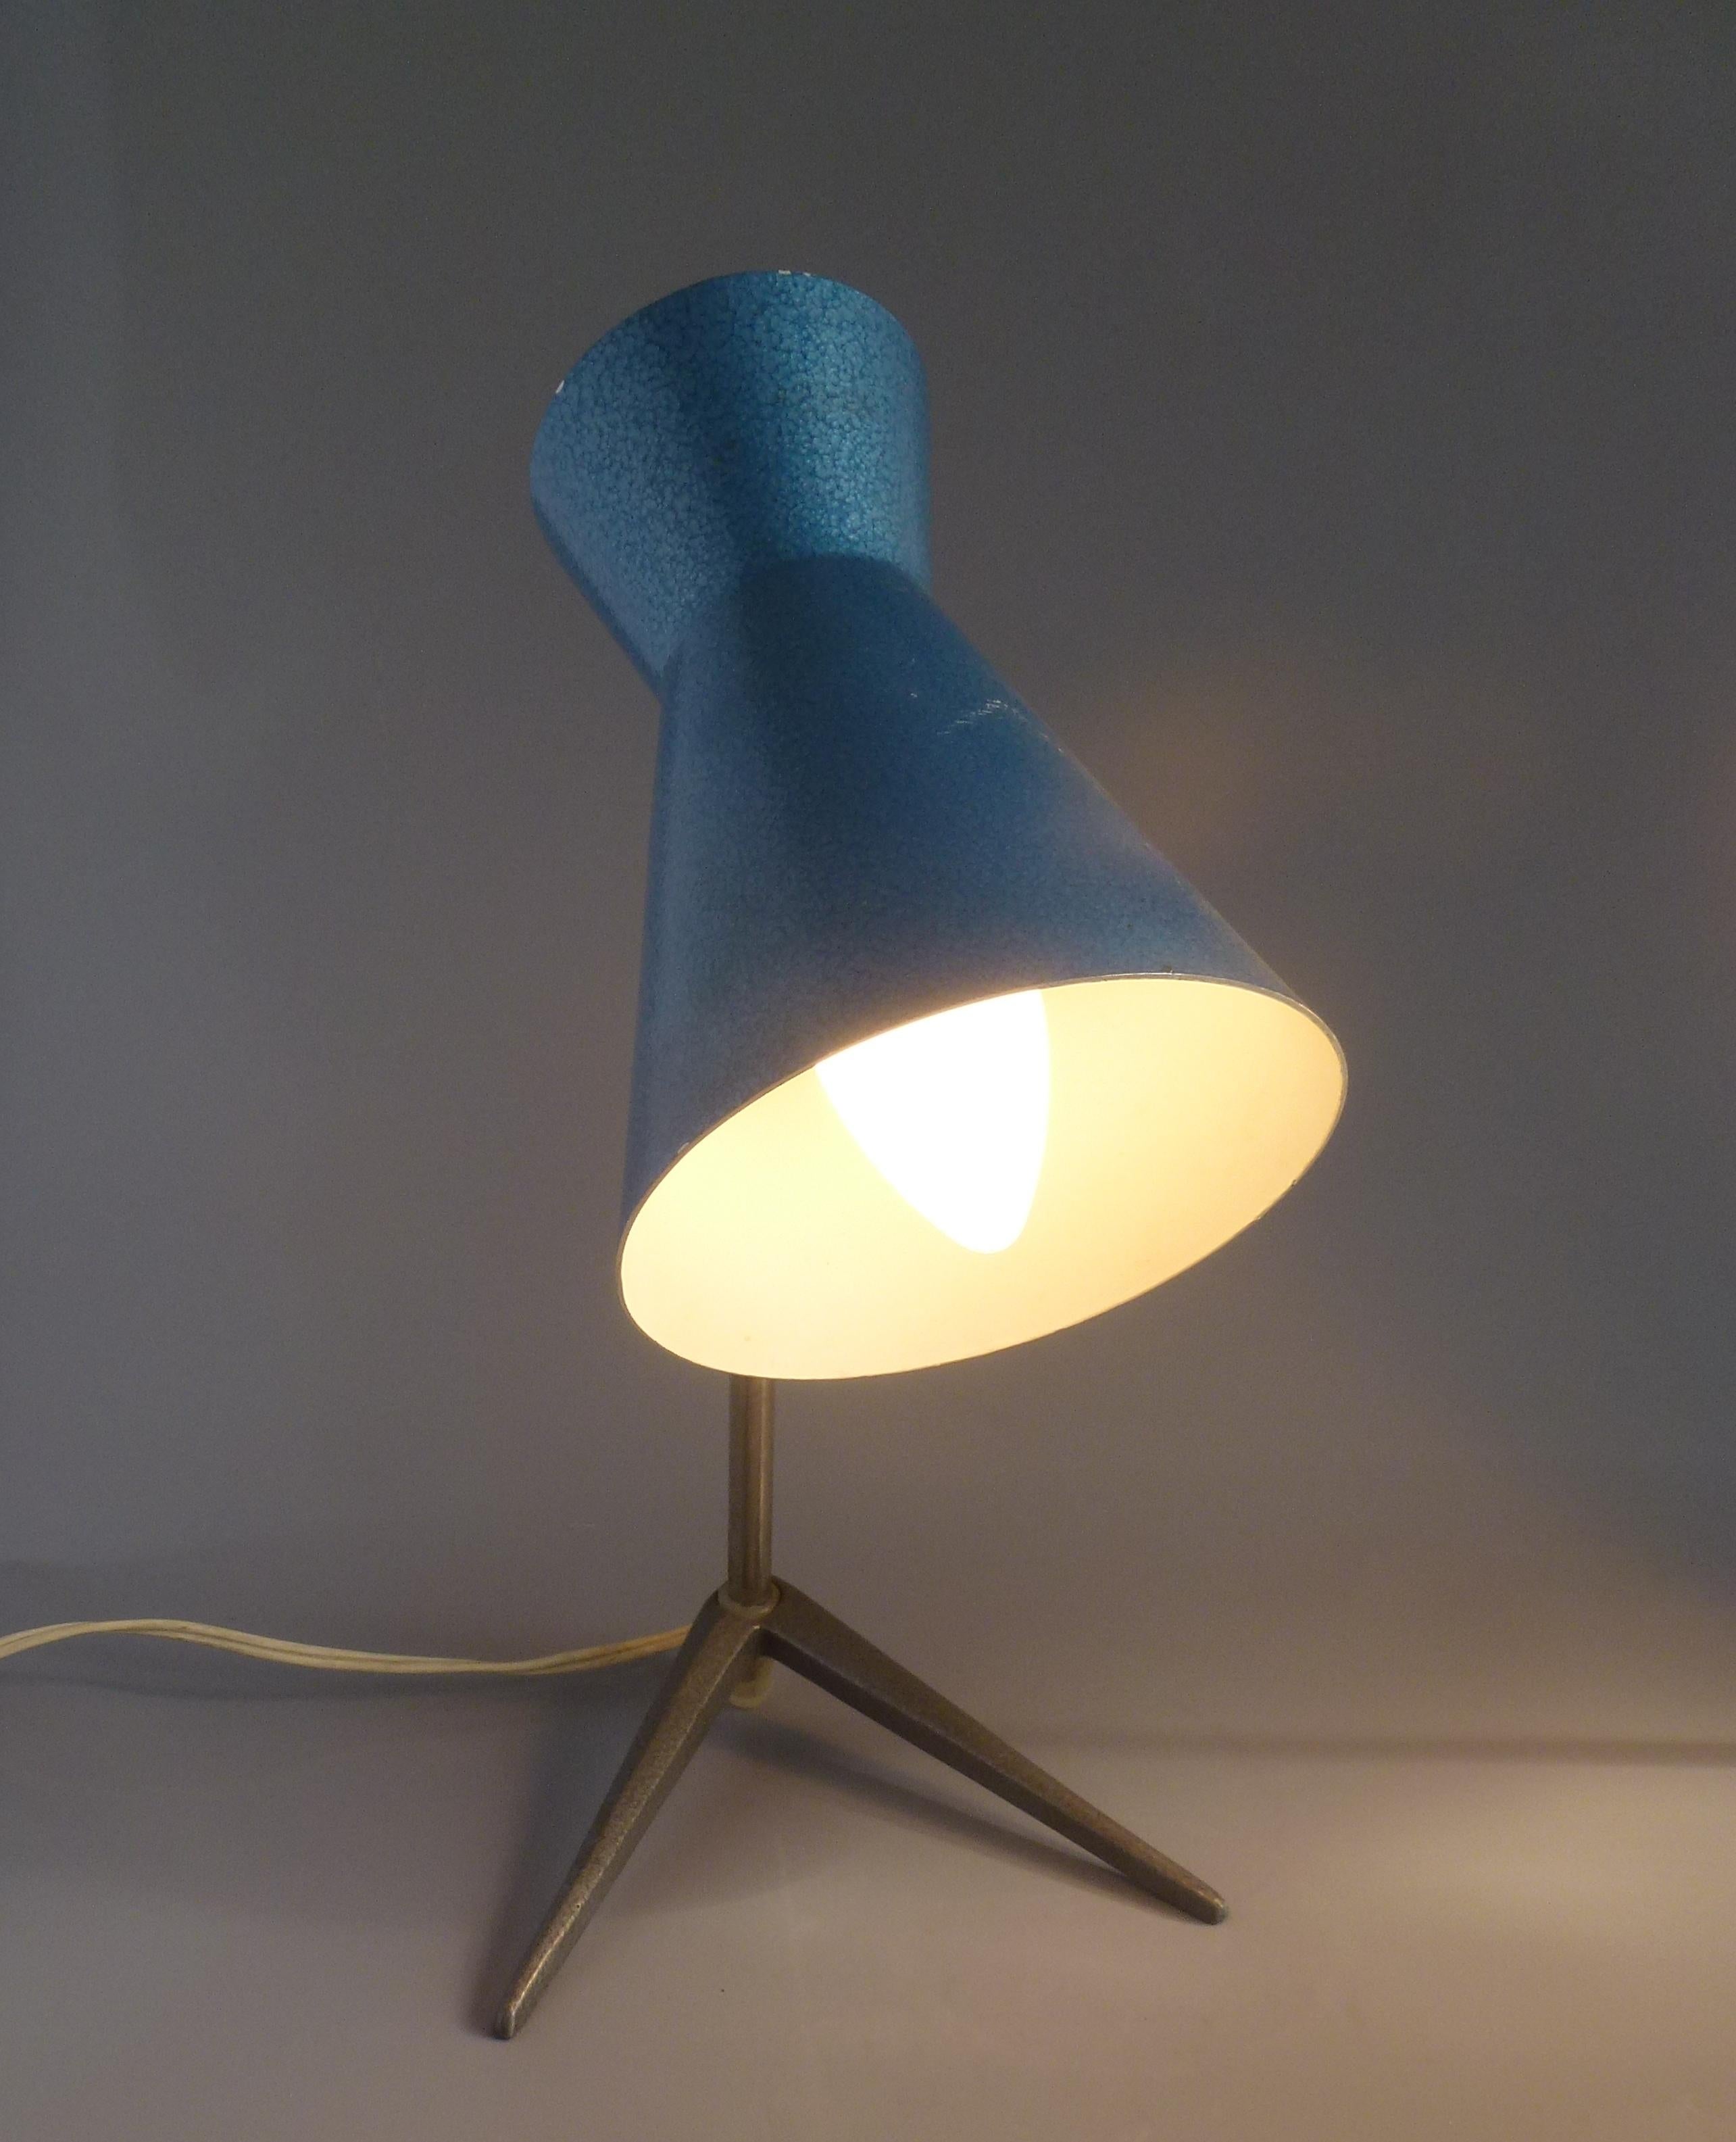 Original Blue Color Pair of Nightstand or Table Lamps, Hungary 1960s For Sale 2